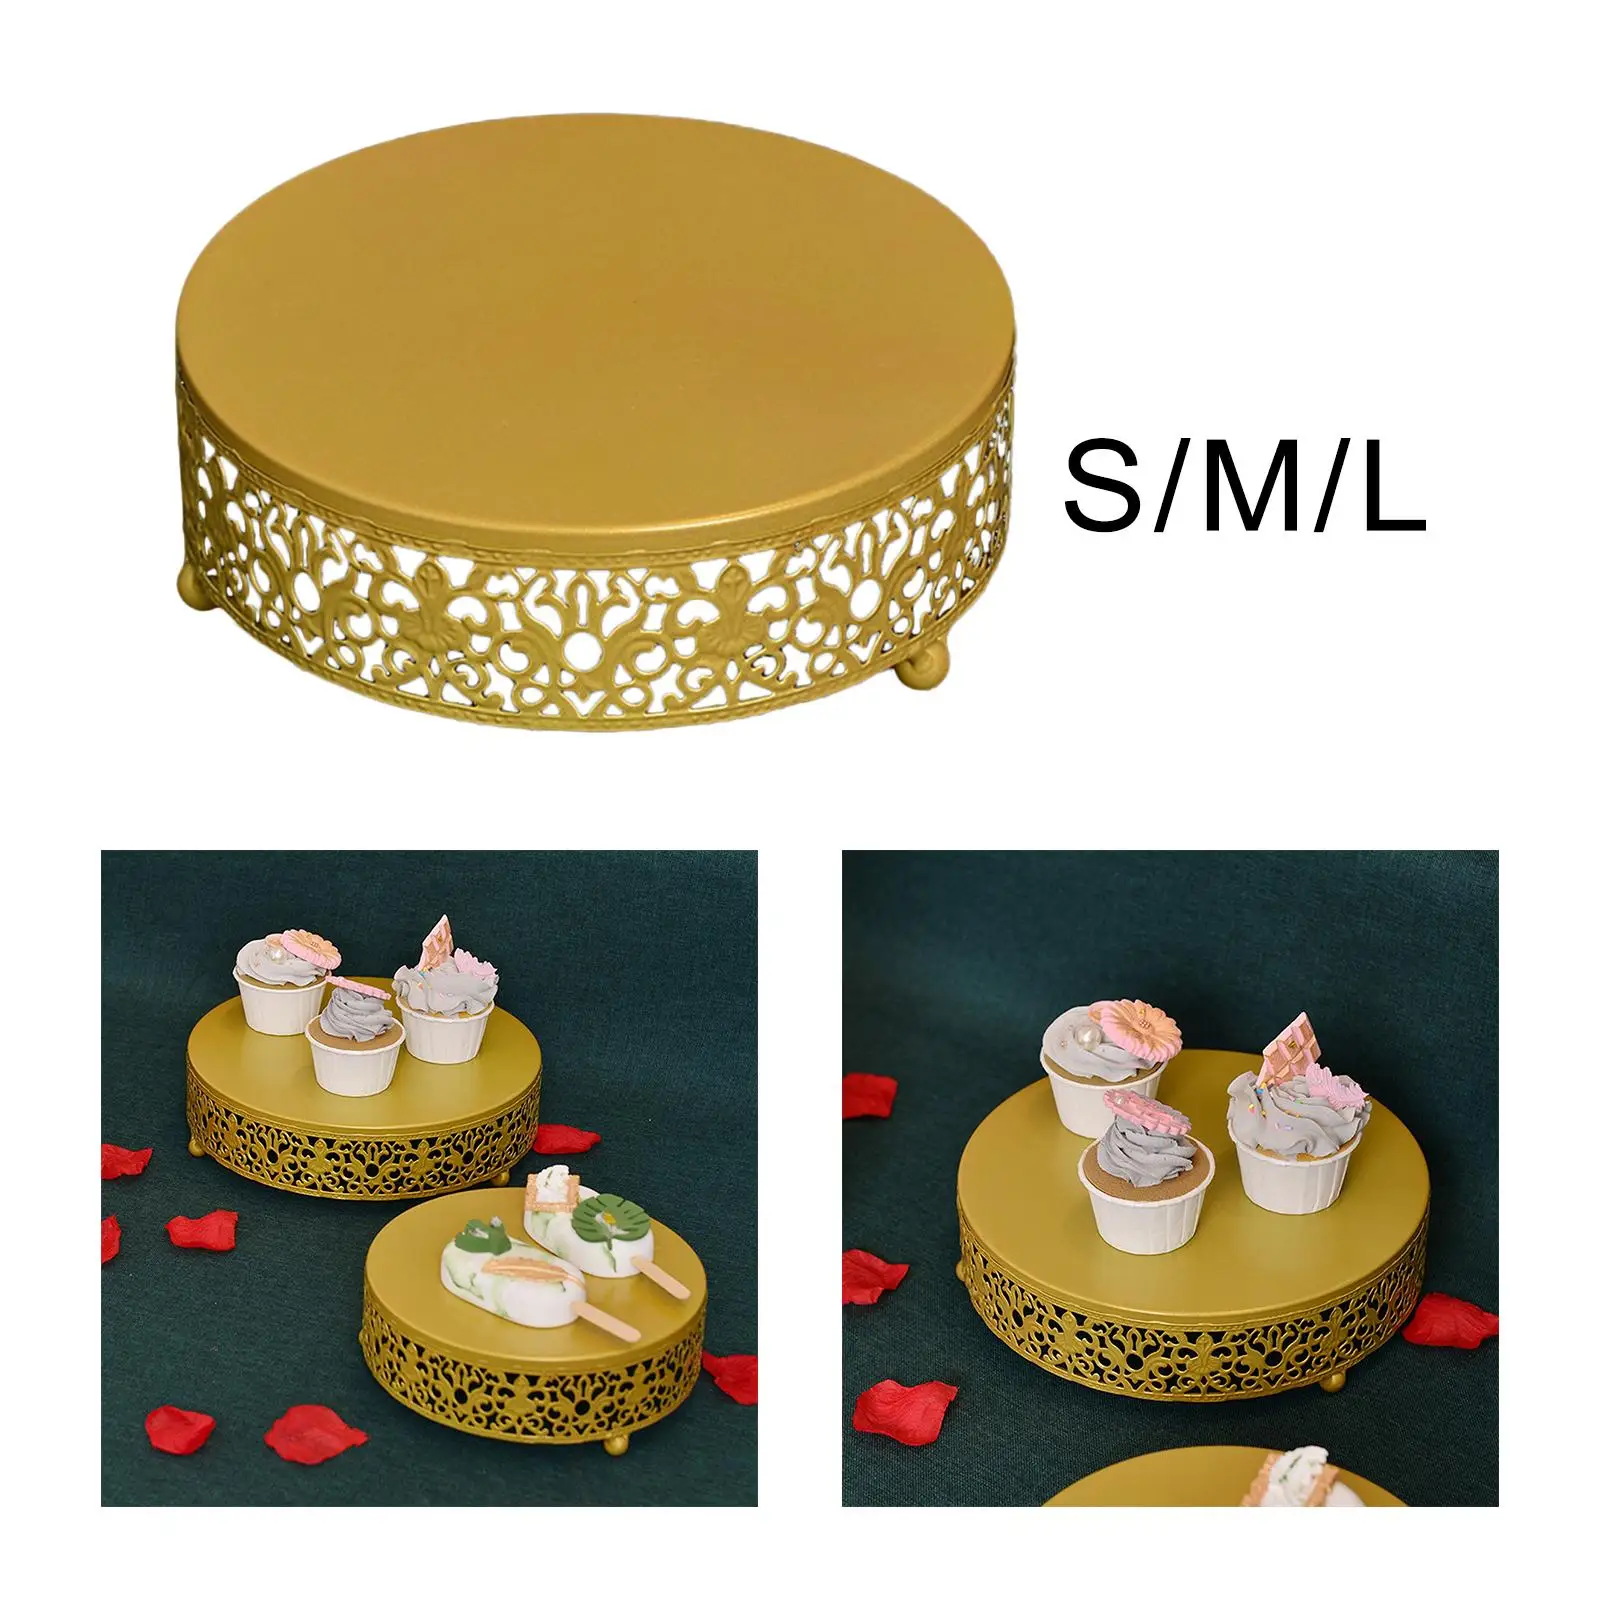 Multifunctional Cake Stand Cake Holder Cake Display Tray Fruit Tray for Anniversaries Wedding Birthday Party Baby Shower